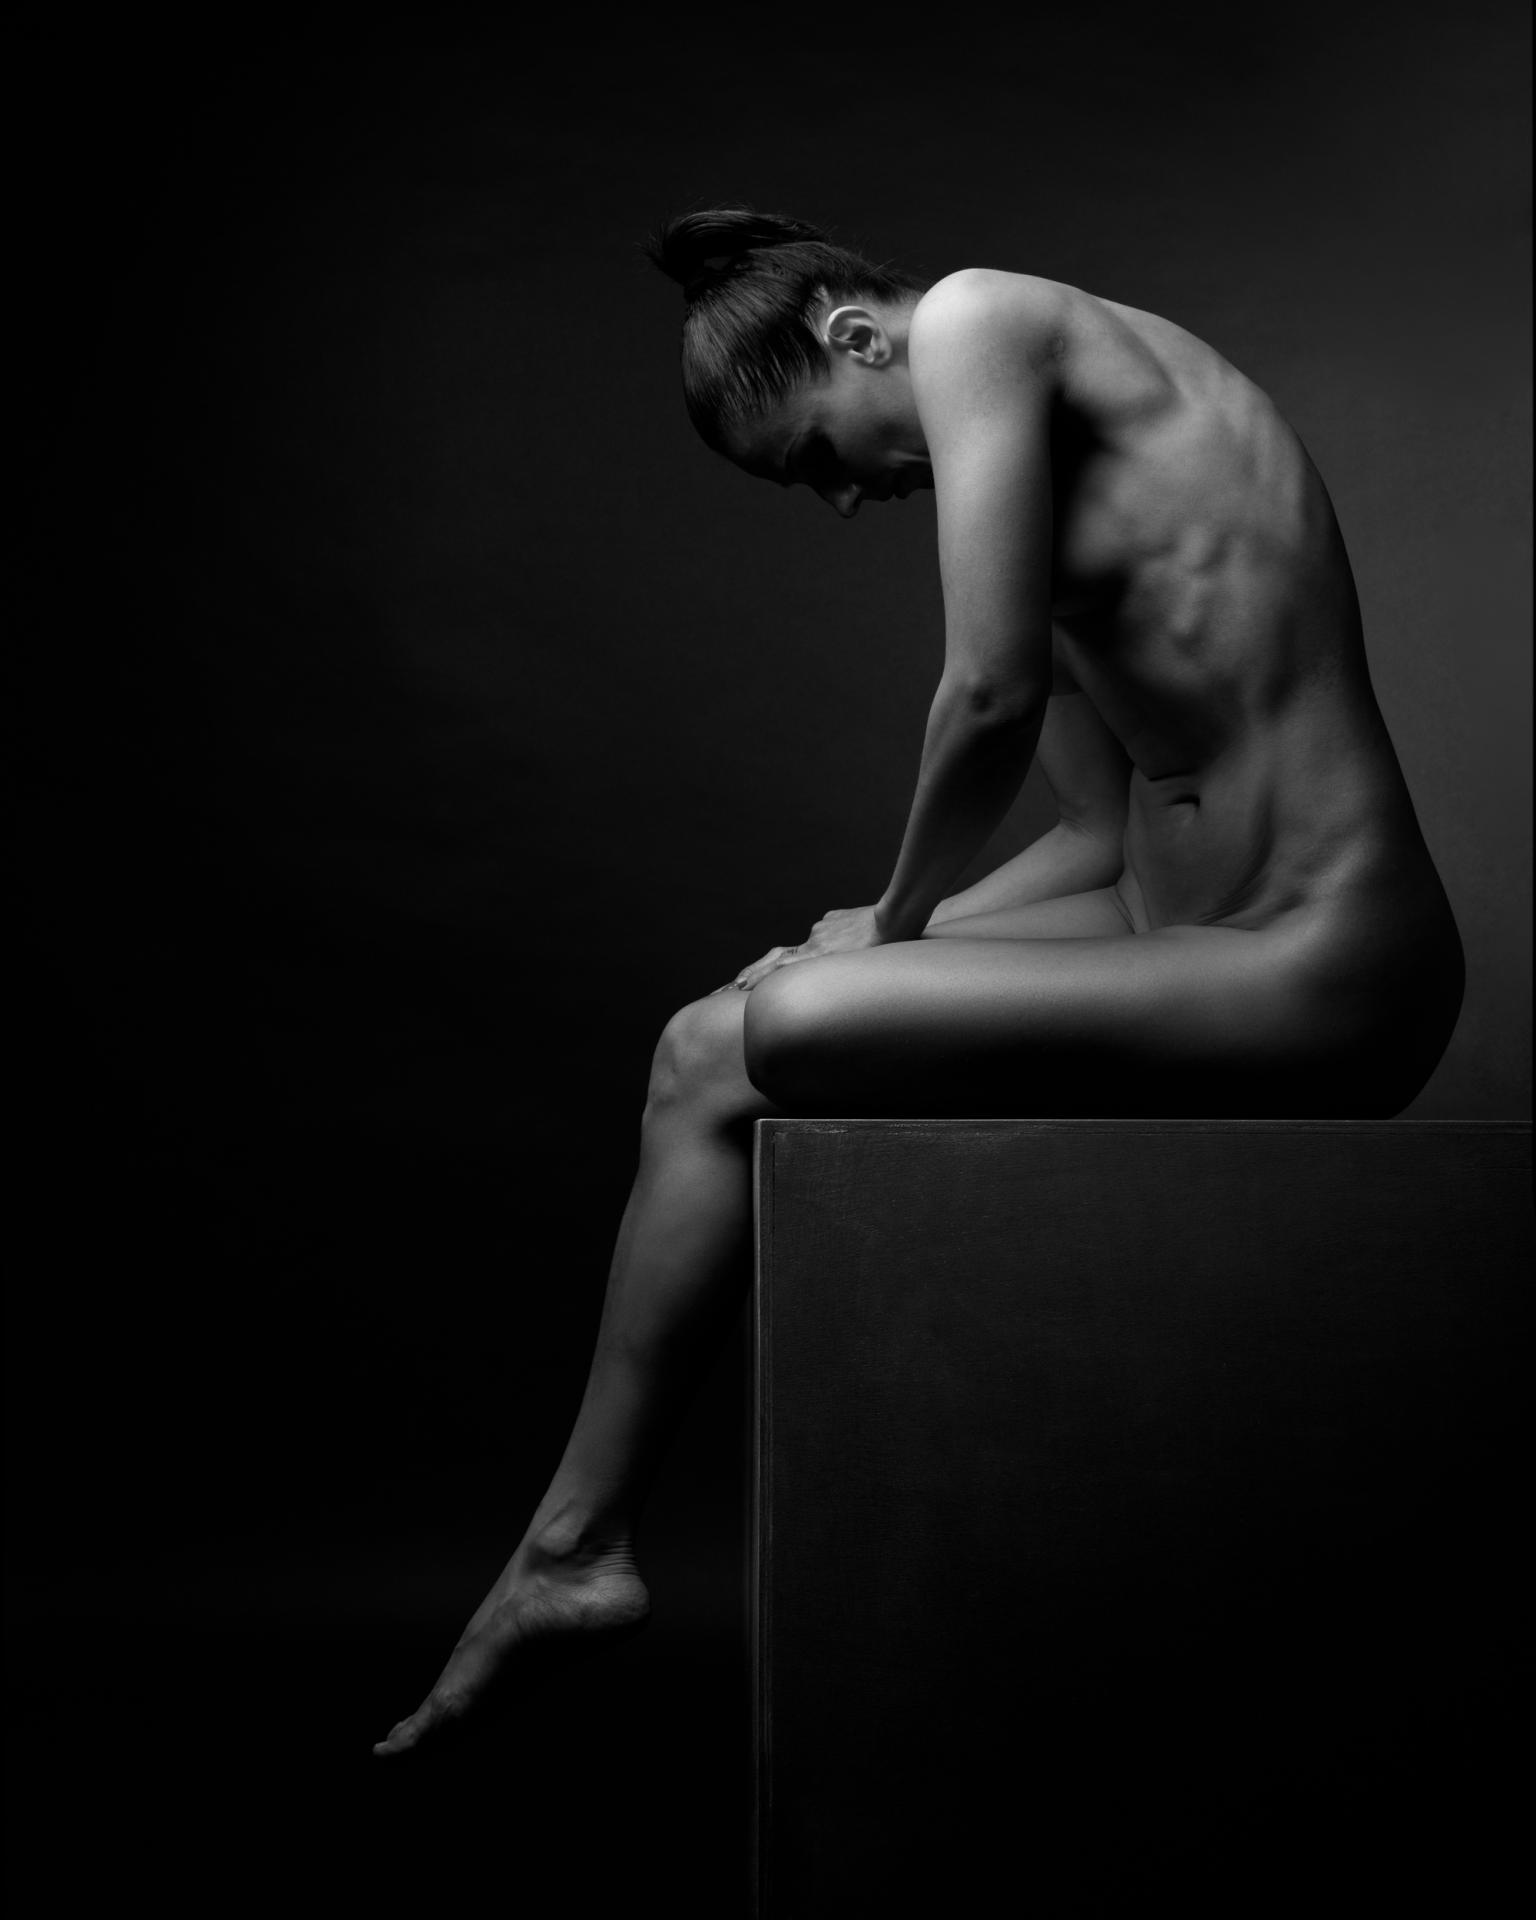 New York Photography Awards Winner - Postures Of The Naked Self